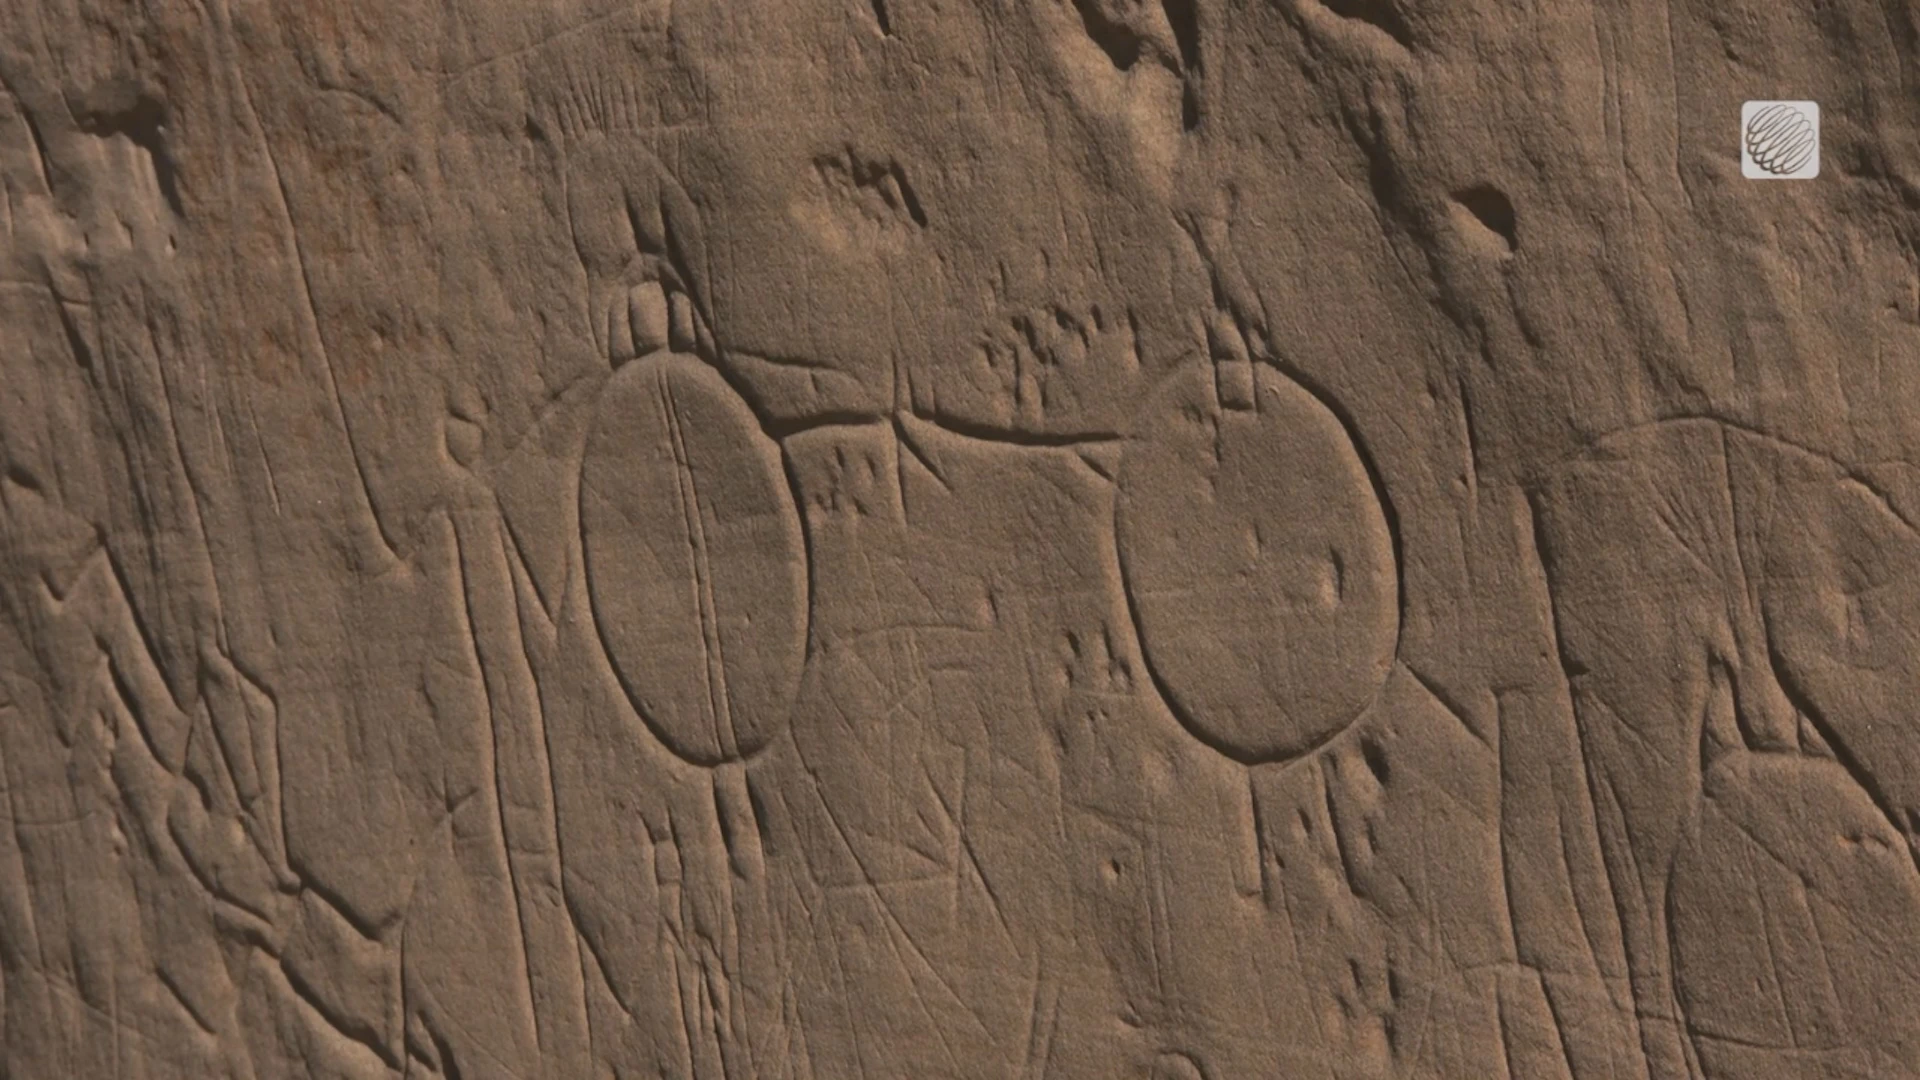 This sacred site holds thousands of ancient rock art images